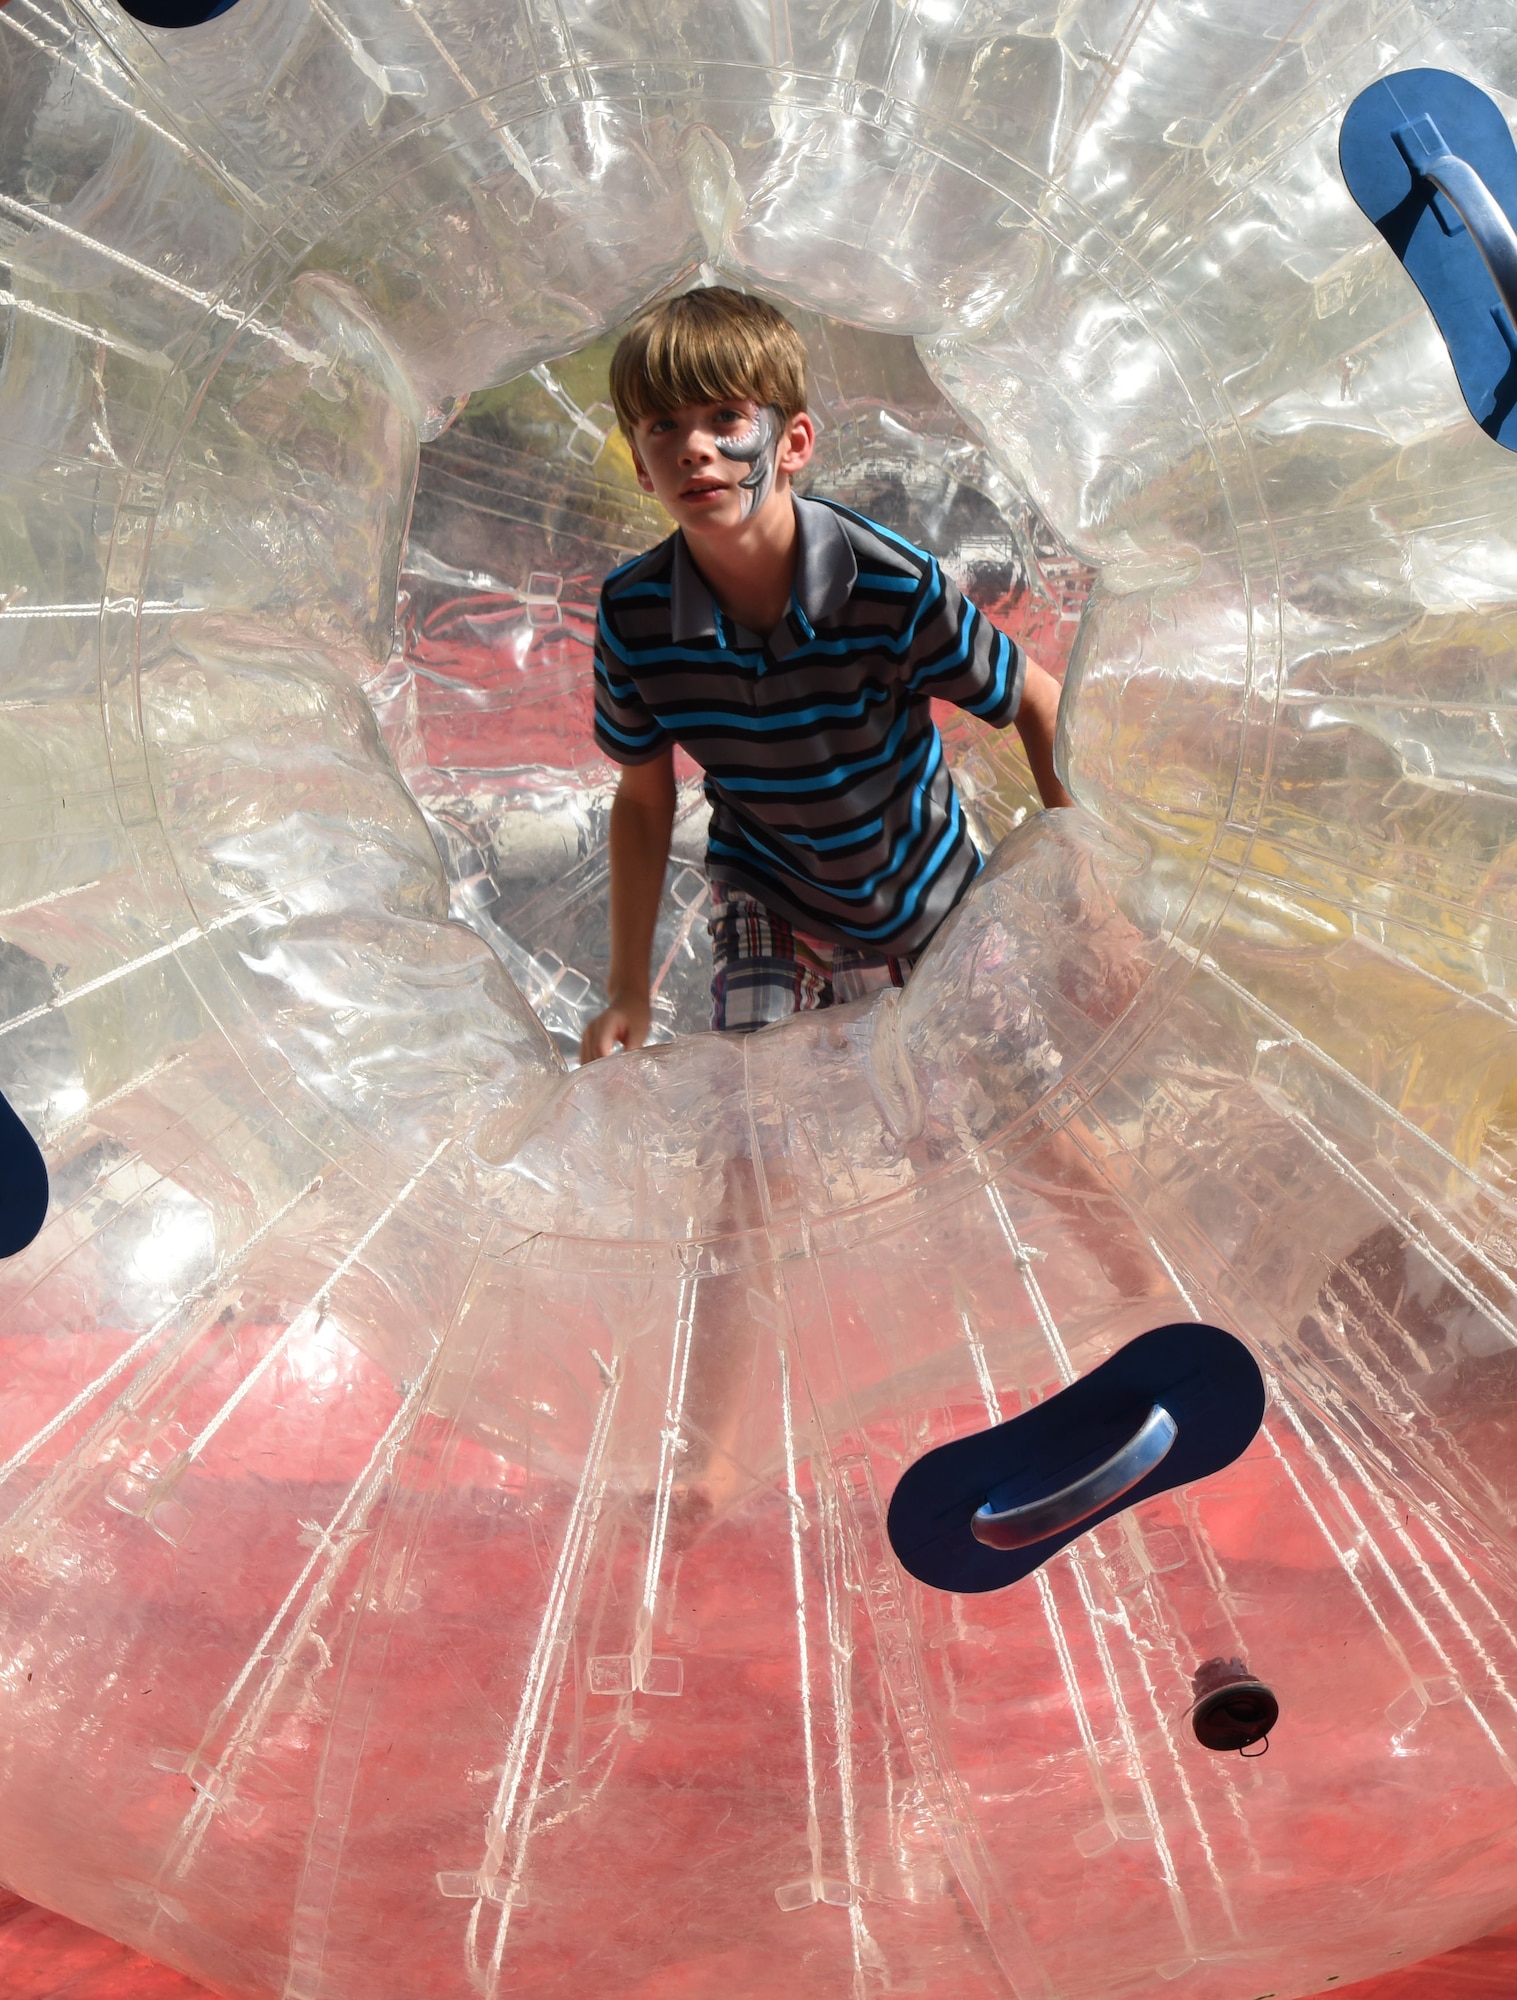 Chris Sentilles , son of Master Sgt. Chris Sentilles, 815th Airlift Squadron load master, plays inside a hamster ball during the Pops in the Park event at Marina Park July 1, 2017, on Keesler Air Force Base, Miss. The event also included a kids’ fishing rodeo, mullet toss, fireworks display and music performances. (U.S. Air Force photo by Kemberly Groue)